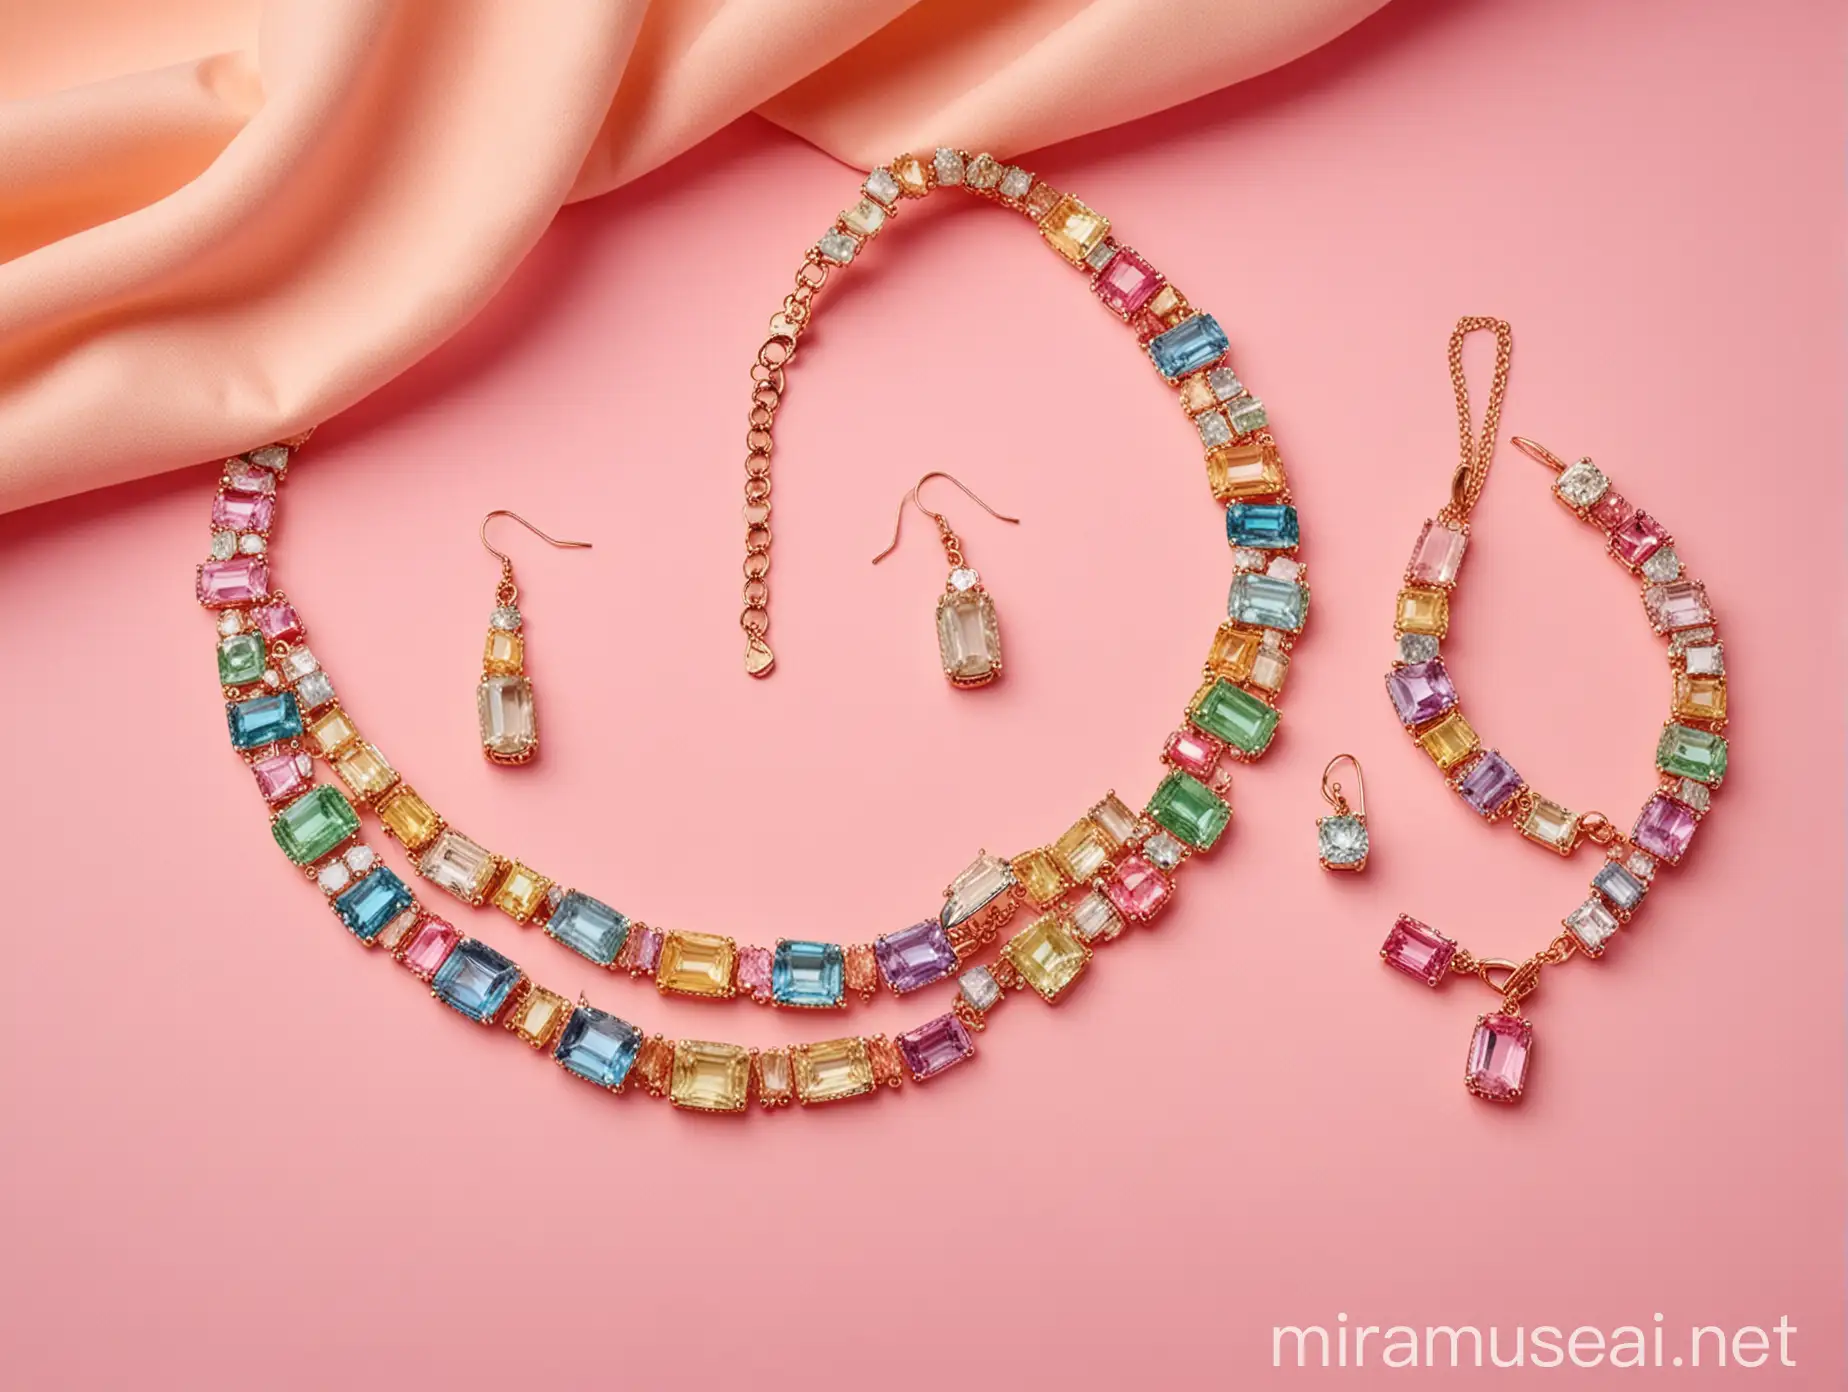 colourful and light gemstones. with earrings, bracelets and neckpiece. baguette shape.pastel background using pink green and yellow 

